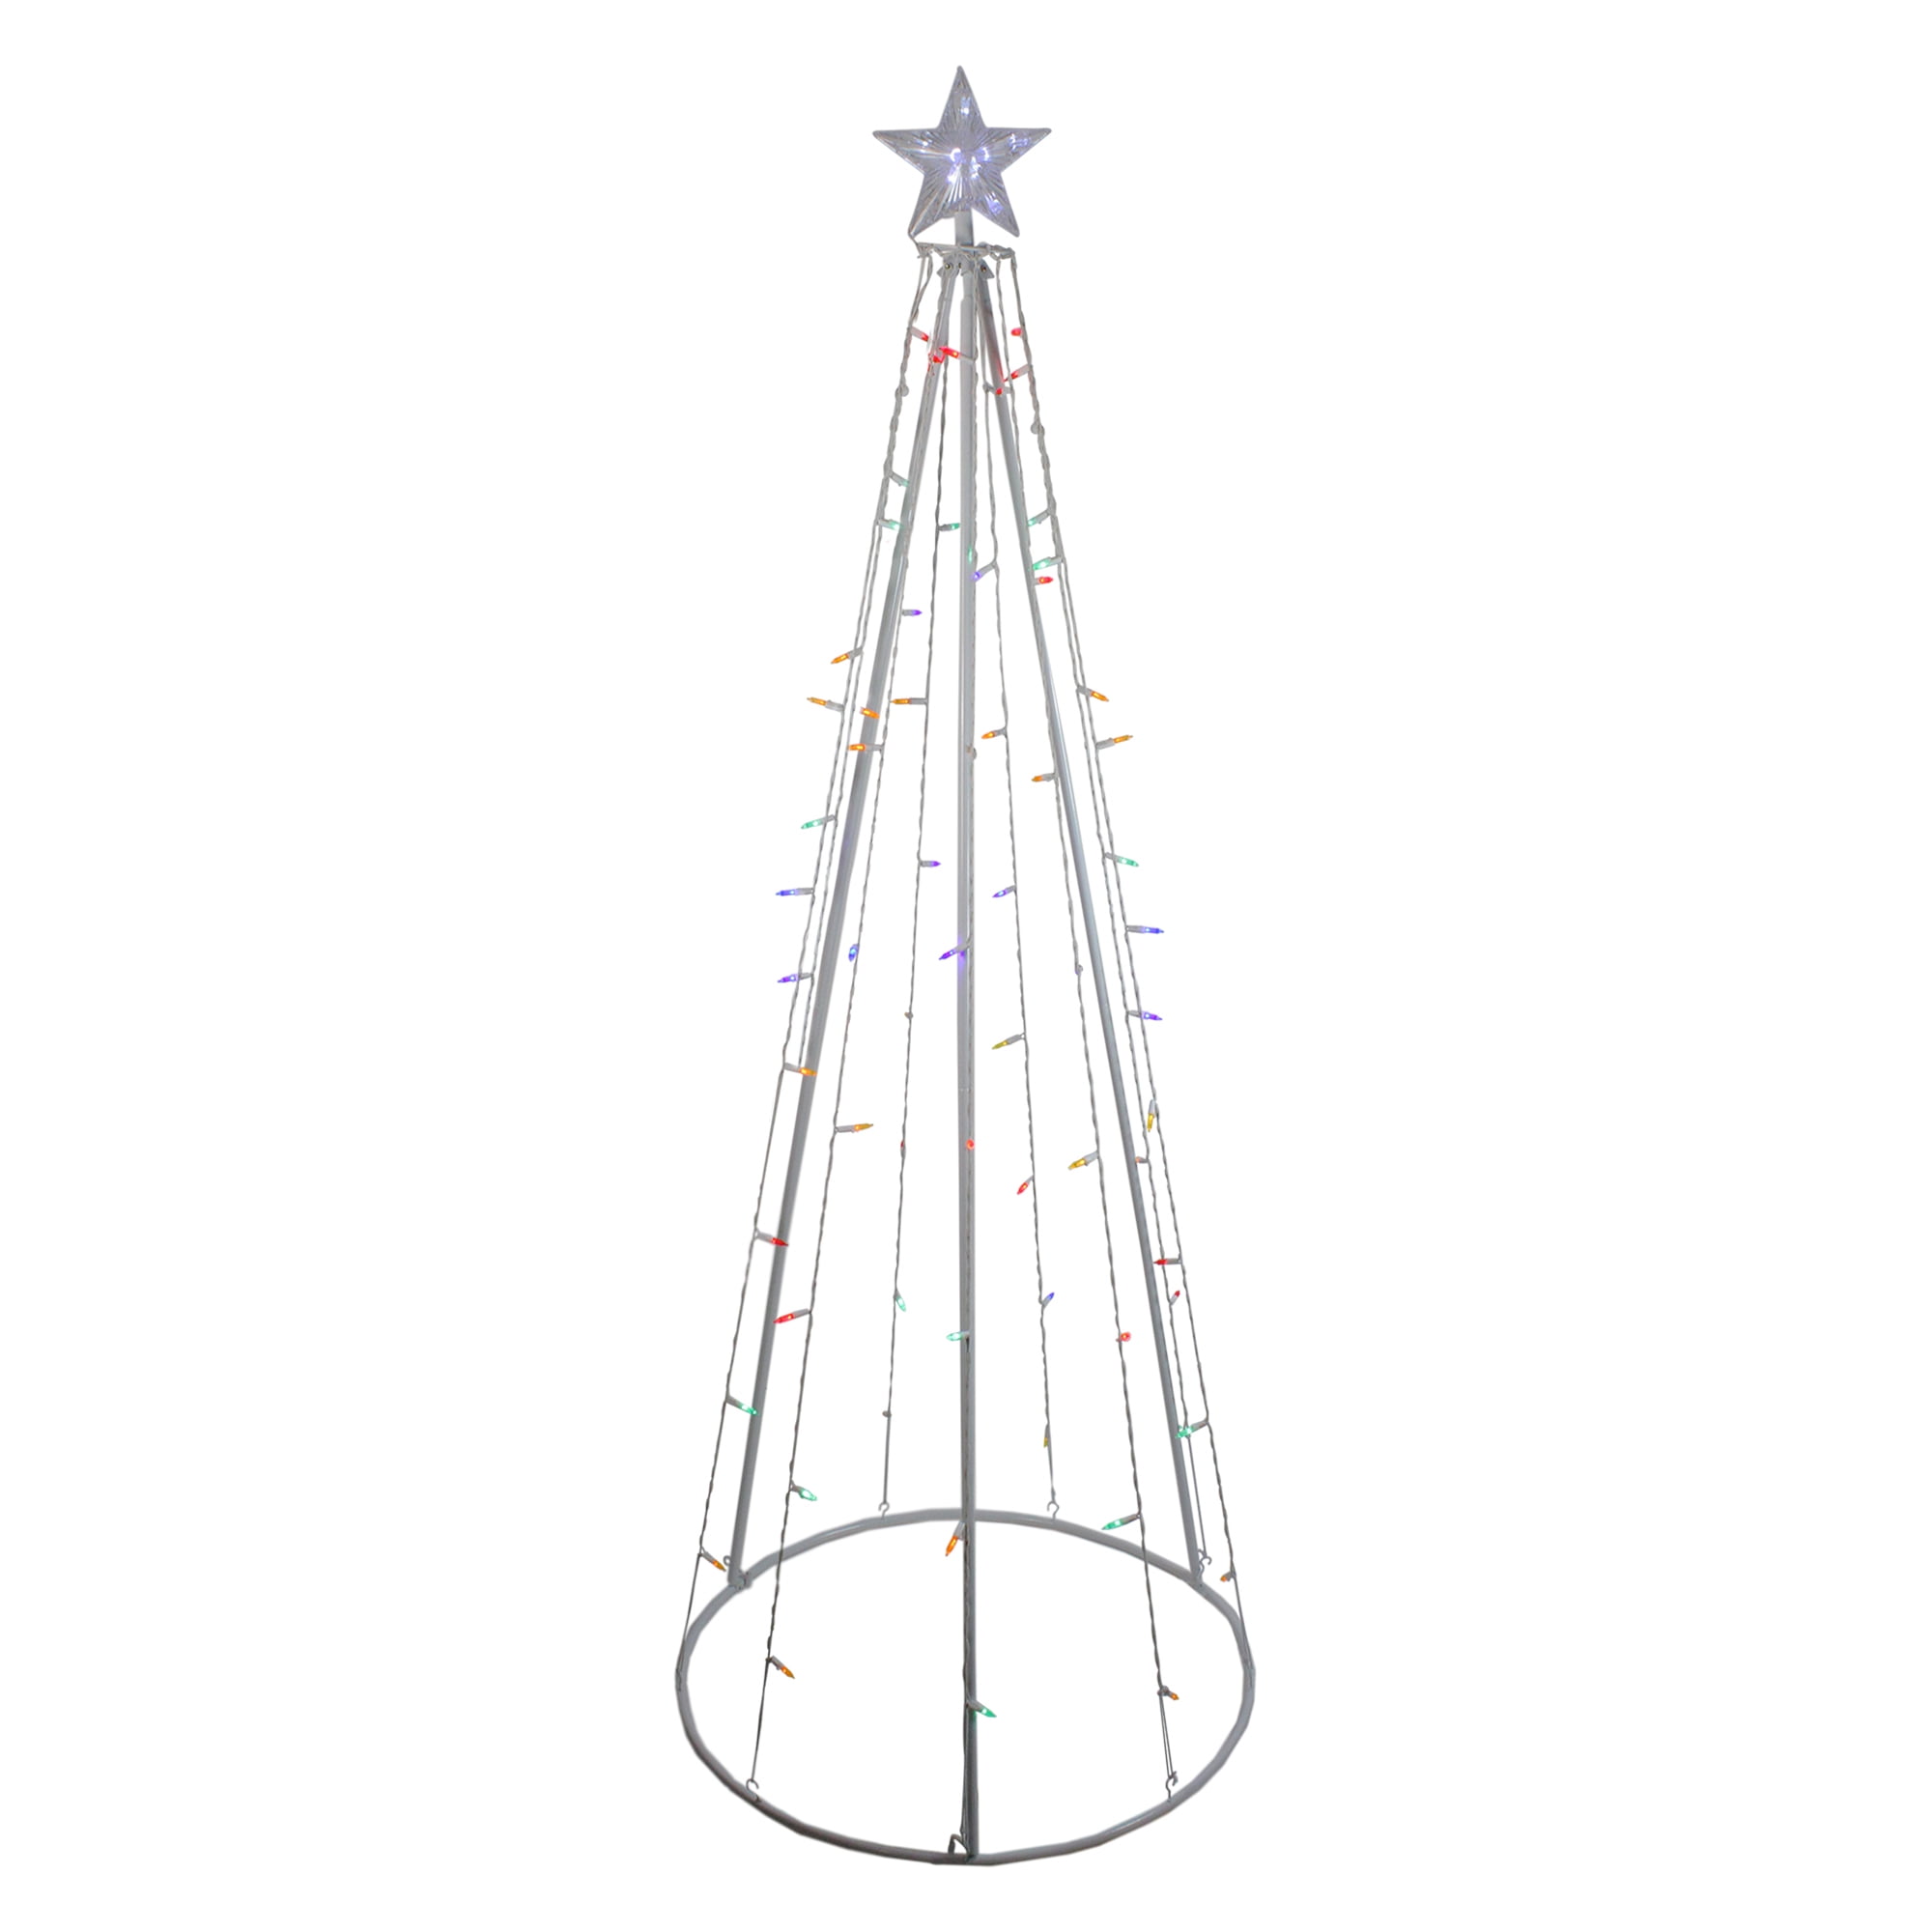 6' Multi-Color LED Lighted Outdoor Christmas Cone Tree Yard Art ...